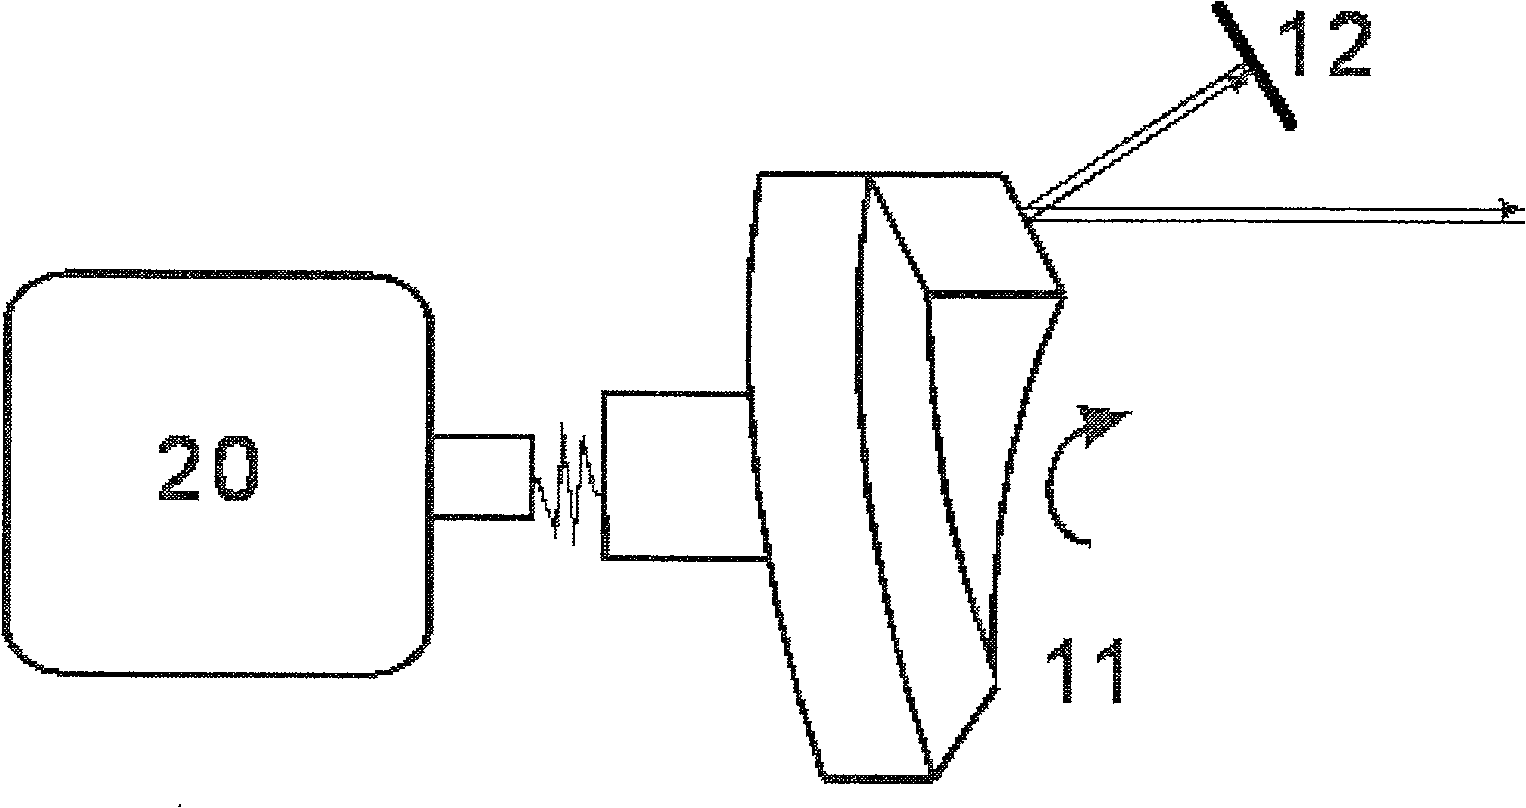 Periodic scanning optical delay line based on inclined parabolic type bus helical face reflection mirror